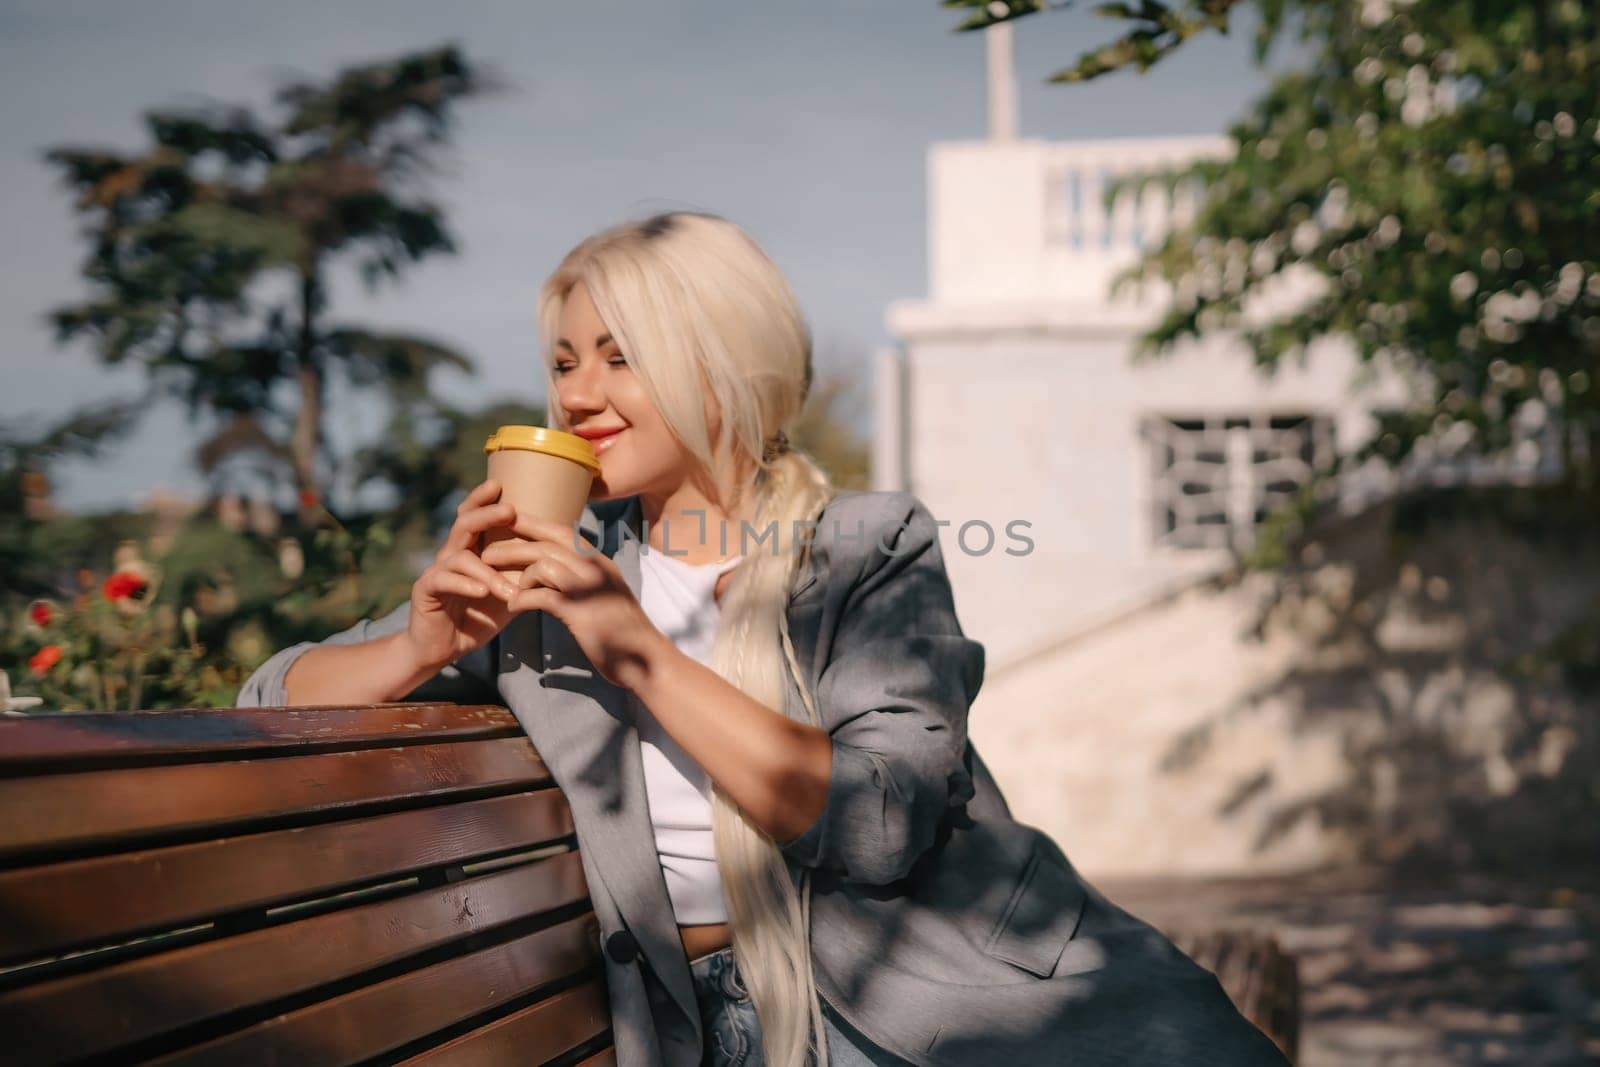 A blonde woman is sitting on a bench with a cup of coffee in her hand. She is smiling and looking out into the distance